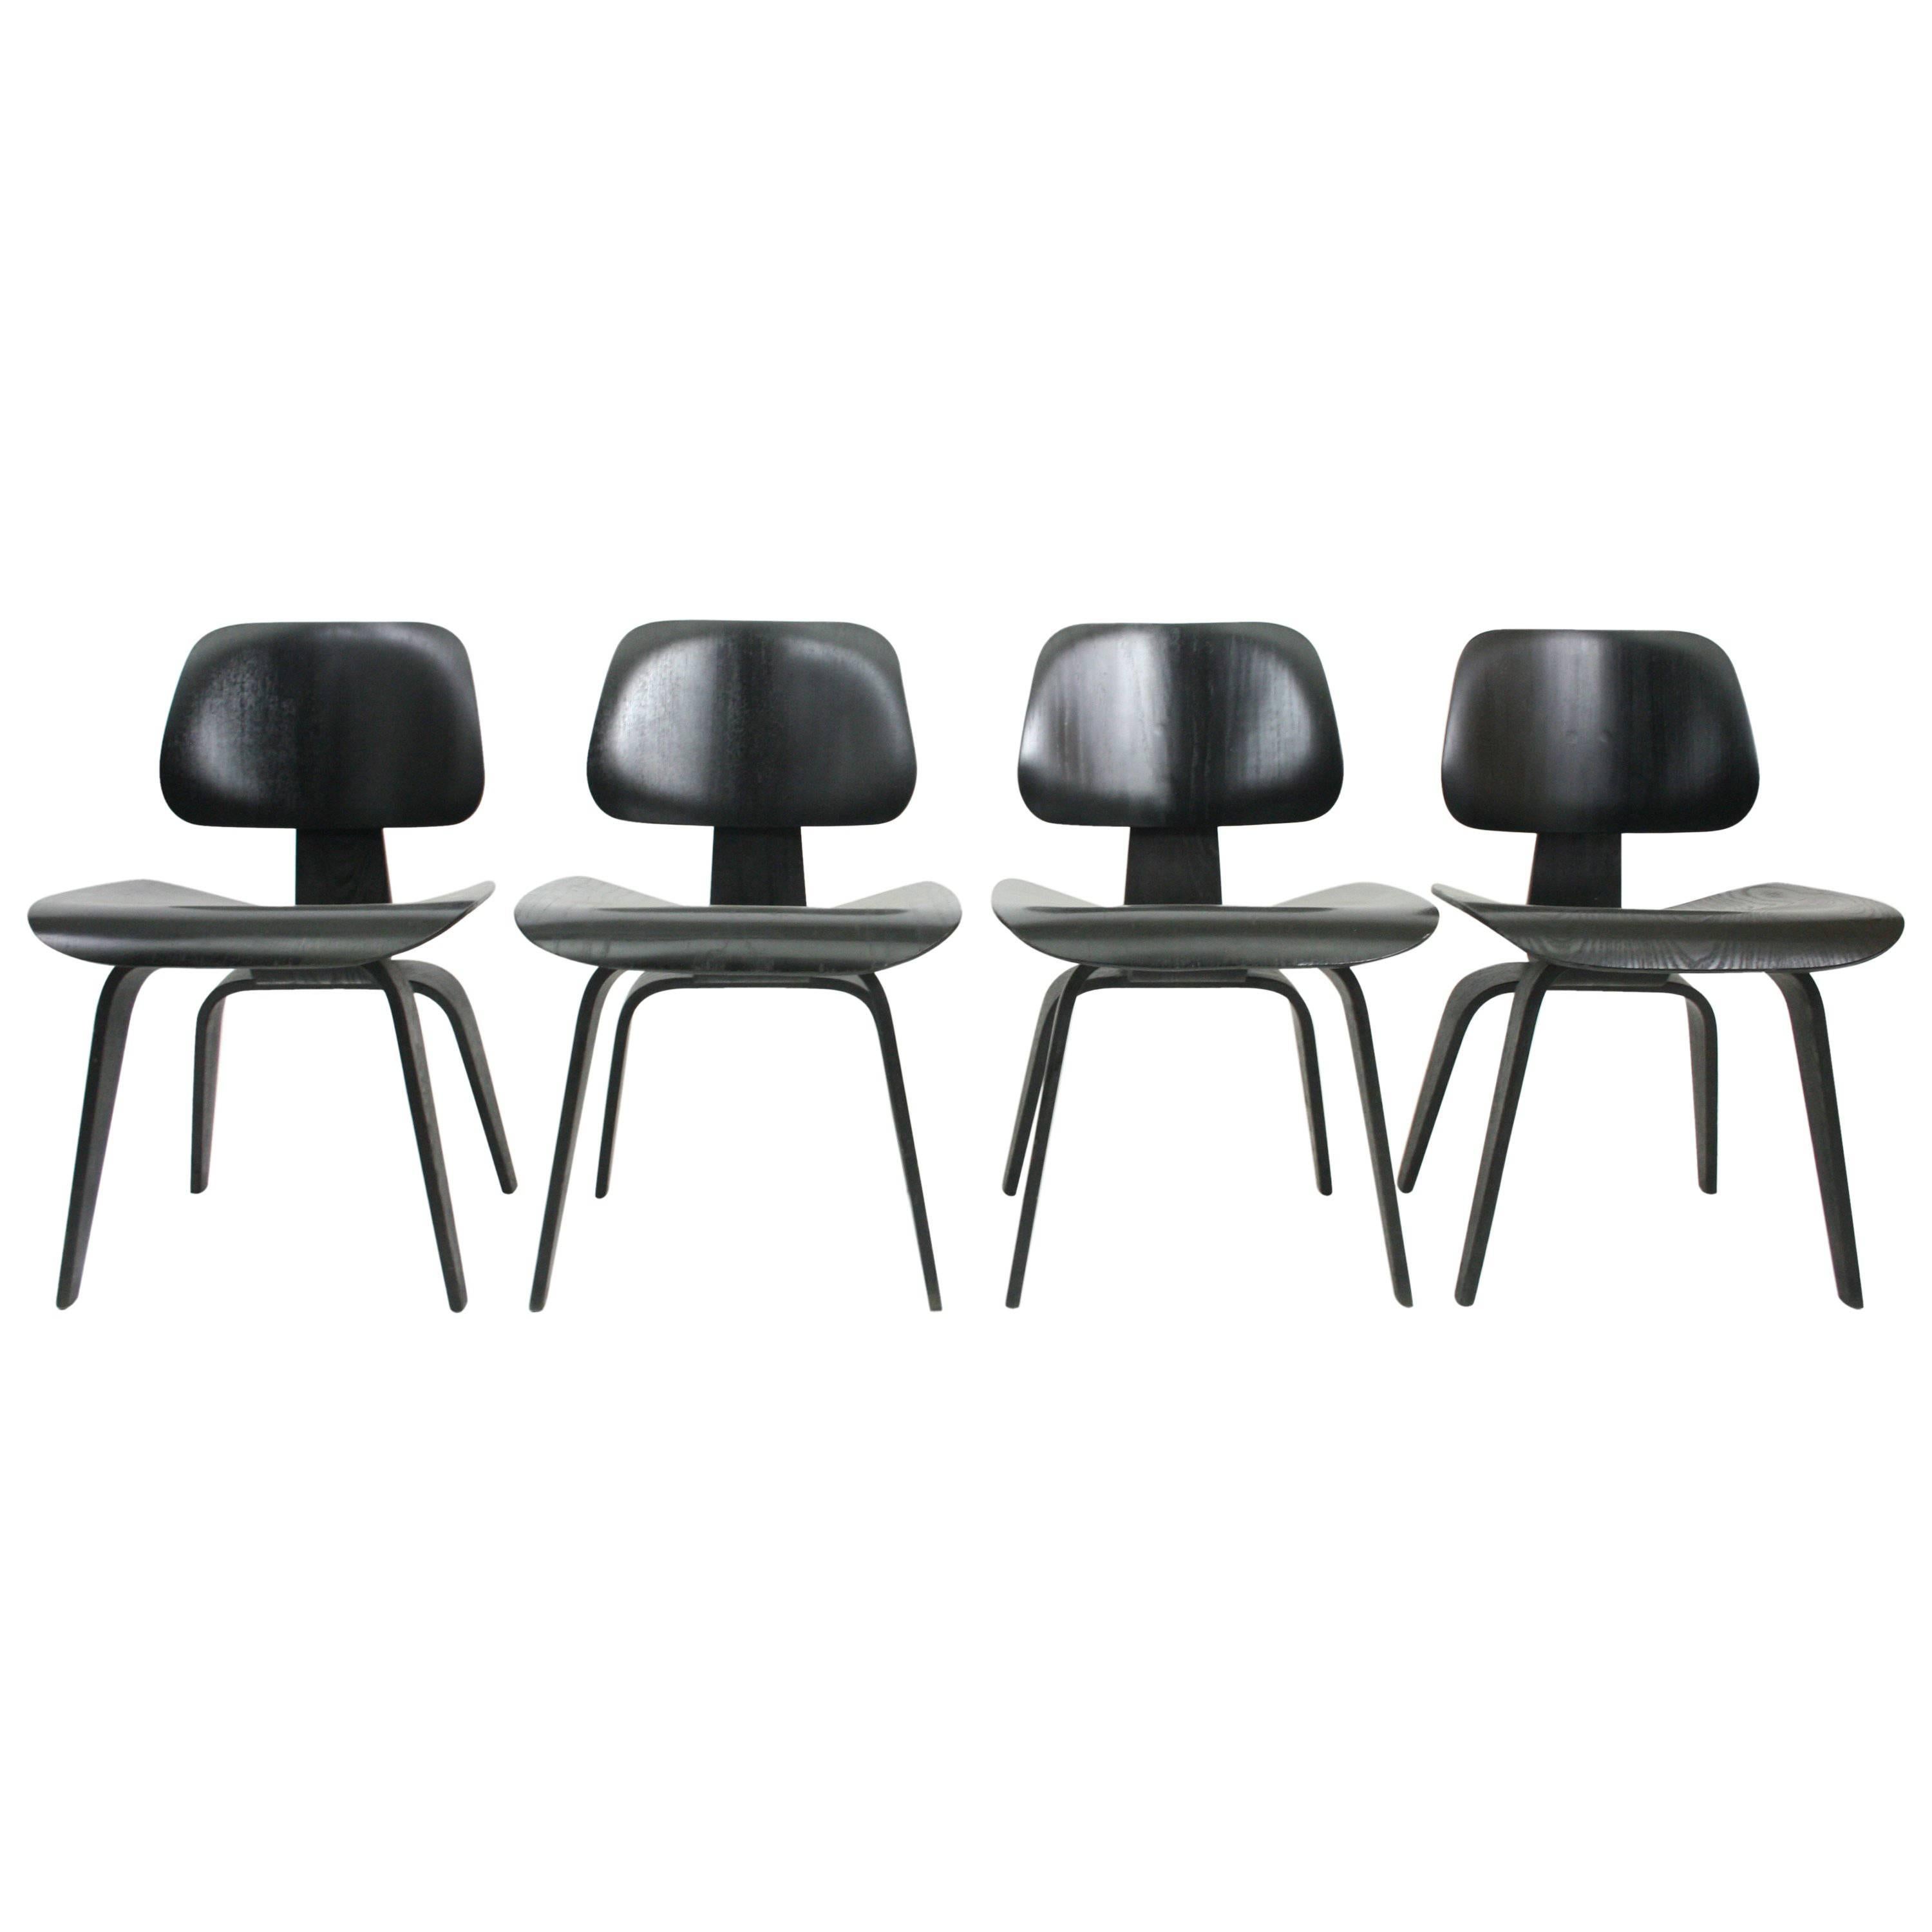 Set of Four Early DCW Chairs by Eames for Evans Products